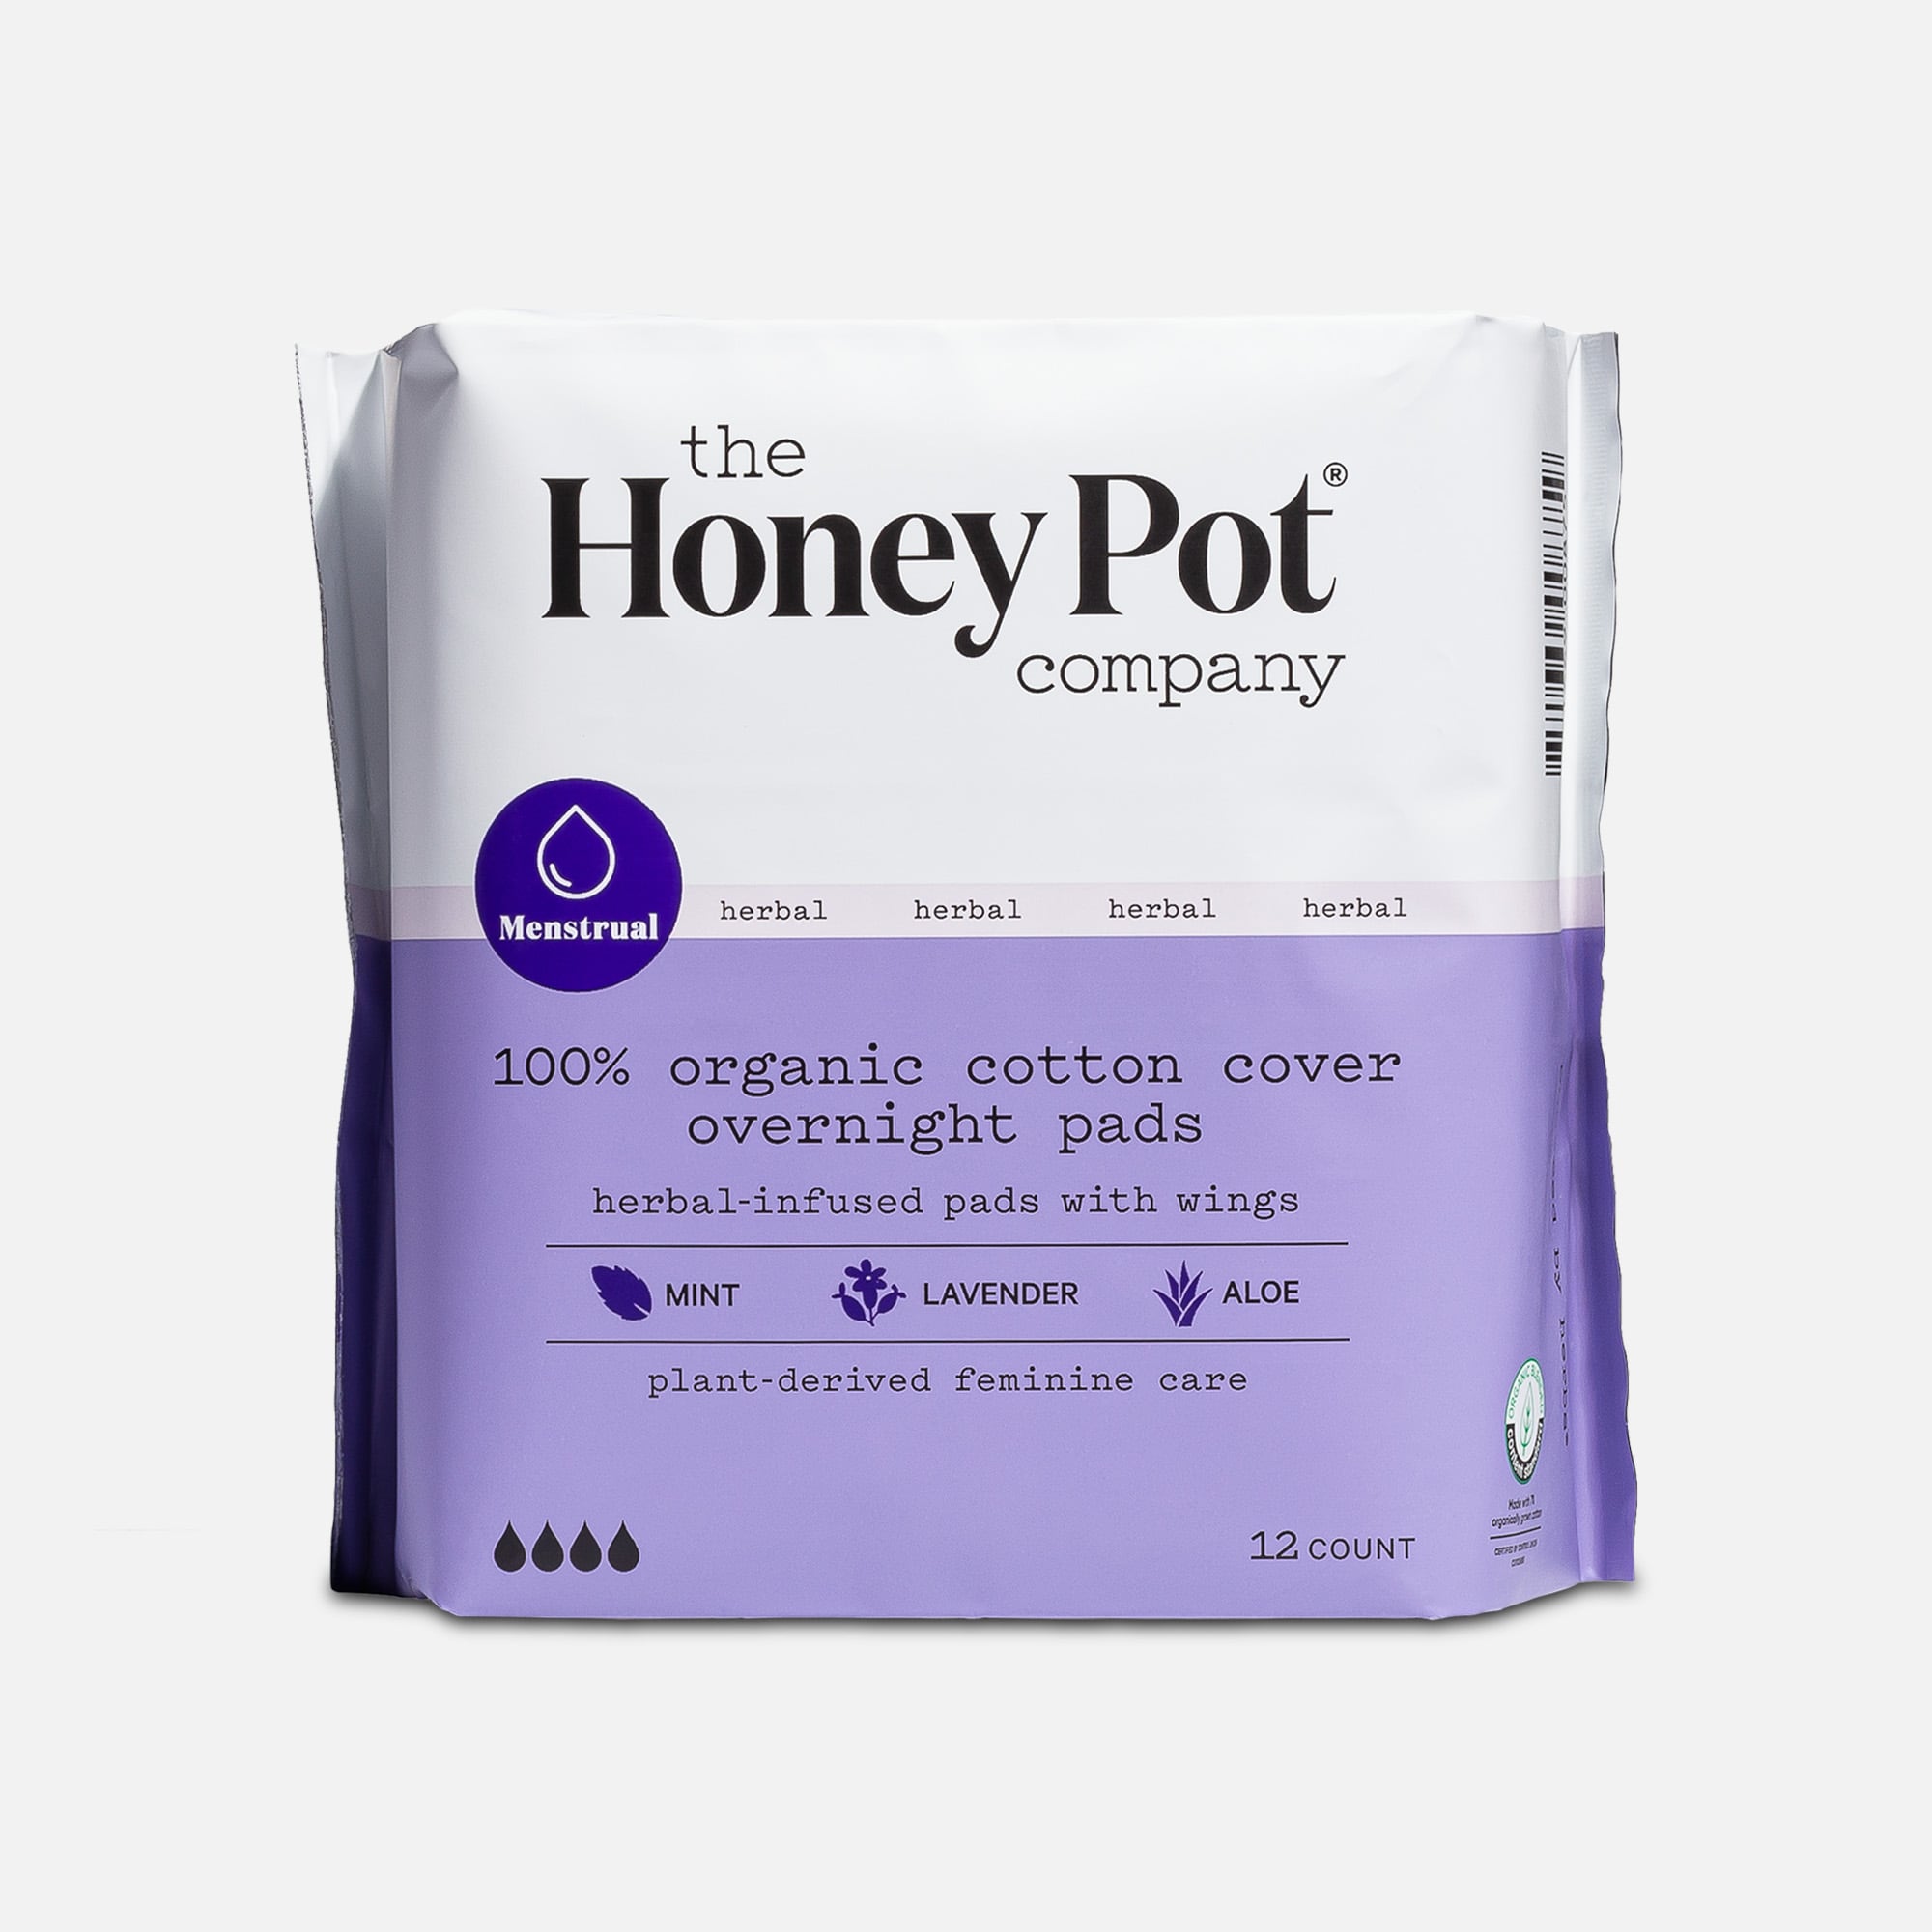 2 Pack) The Honey Pot Company, Organic Regular Herbal-Infused Pads With  Wings, 20 Count 